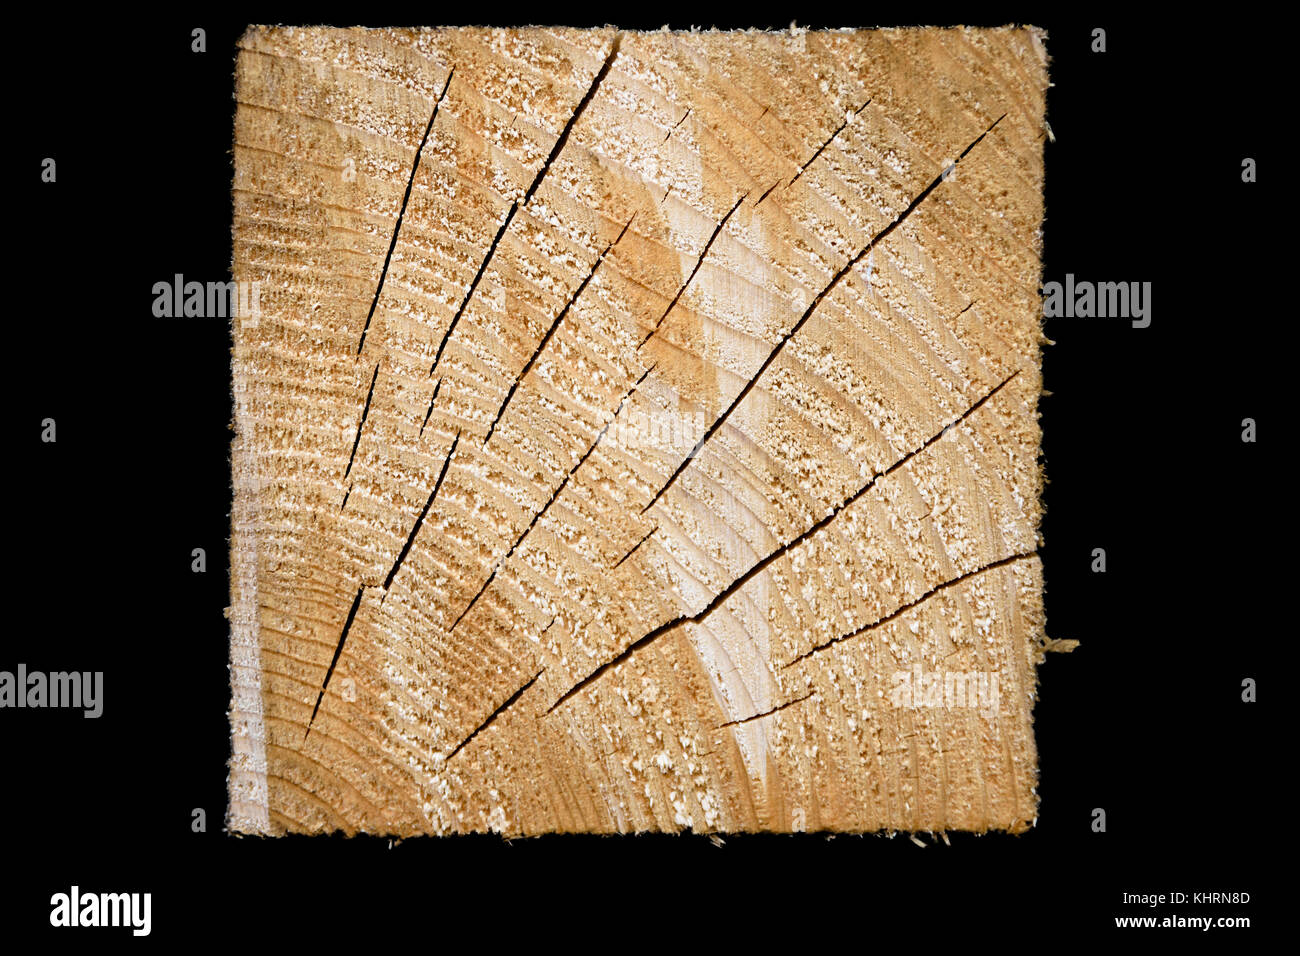 Square Block Of Pine Wood With Rings And Splits Isolated On Black Background Stock Photo